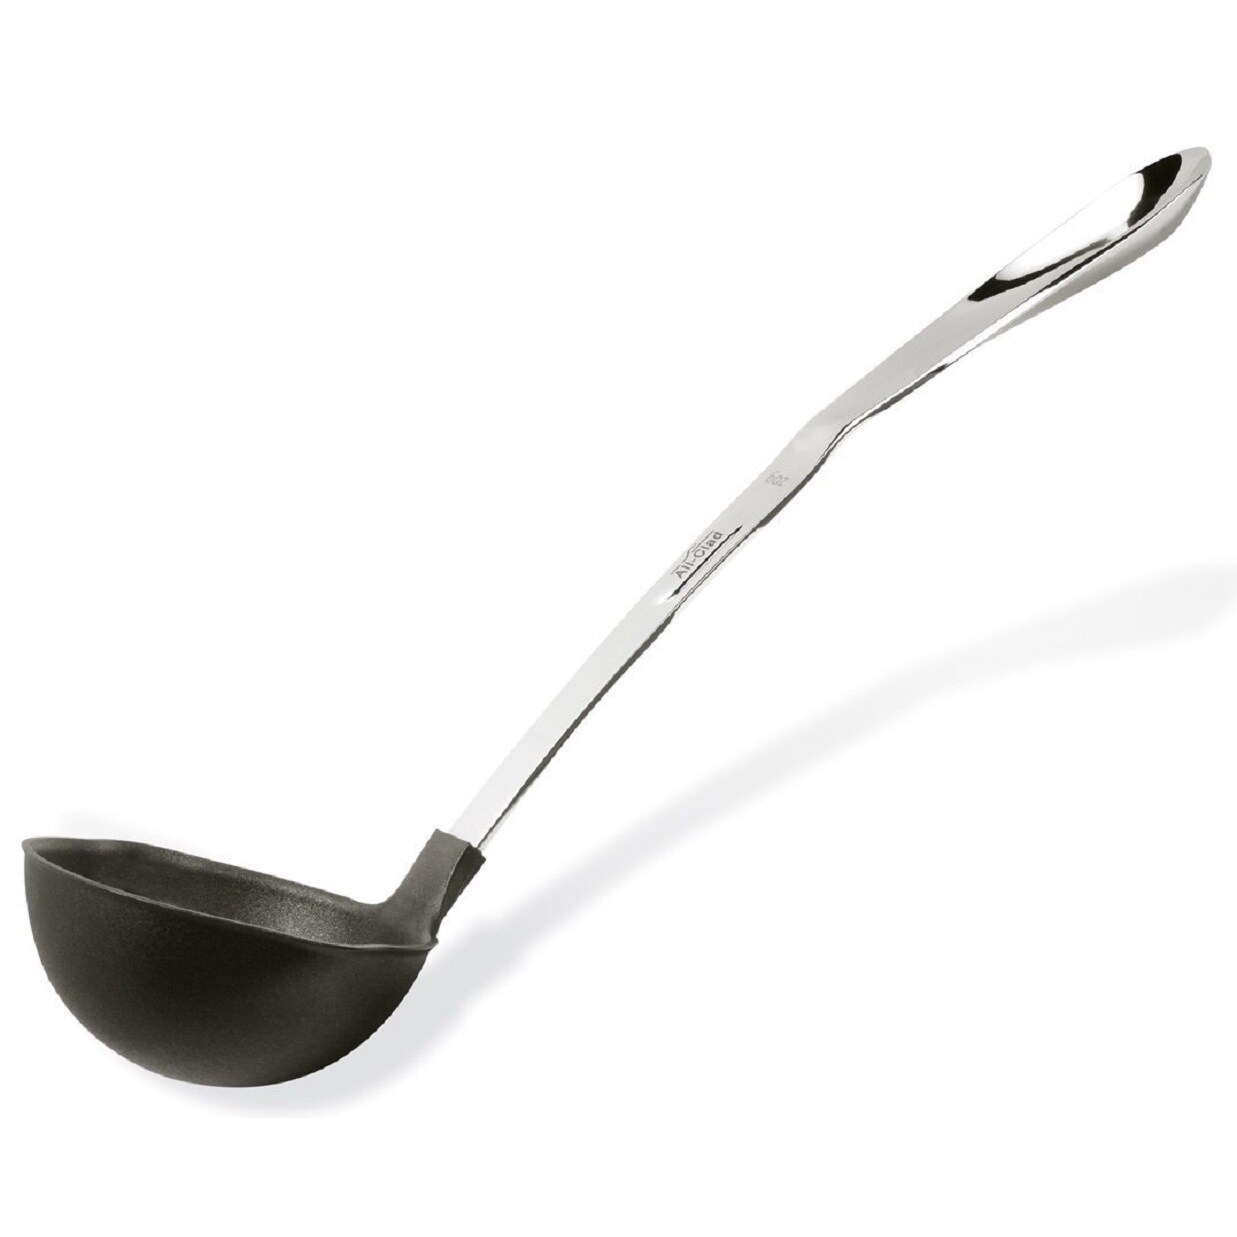 https://ak1.ostkcdn.com/images/products/10545249/All-Clad-Stainless-Steel-Nonstick-Large-Ladle-71d93560-21c3-4ea7-be00-738973f523c6.jpg